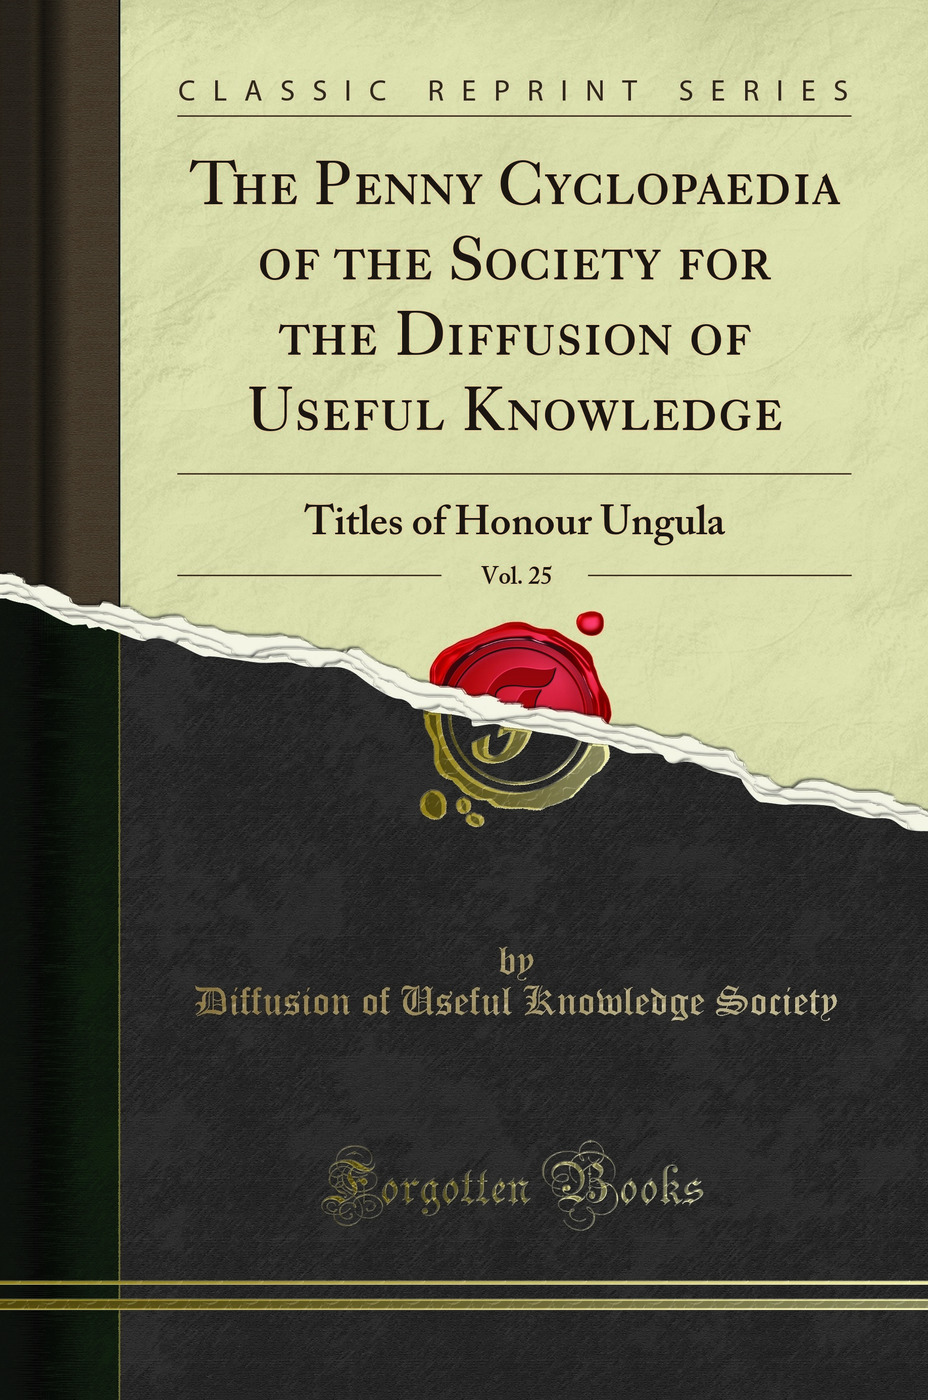 The Penny Cyclopaedia of the Society for the Diffusion of Useful Knowledge, Vol - Diffusion of Useful Knowledge Society